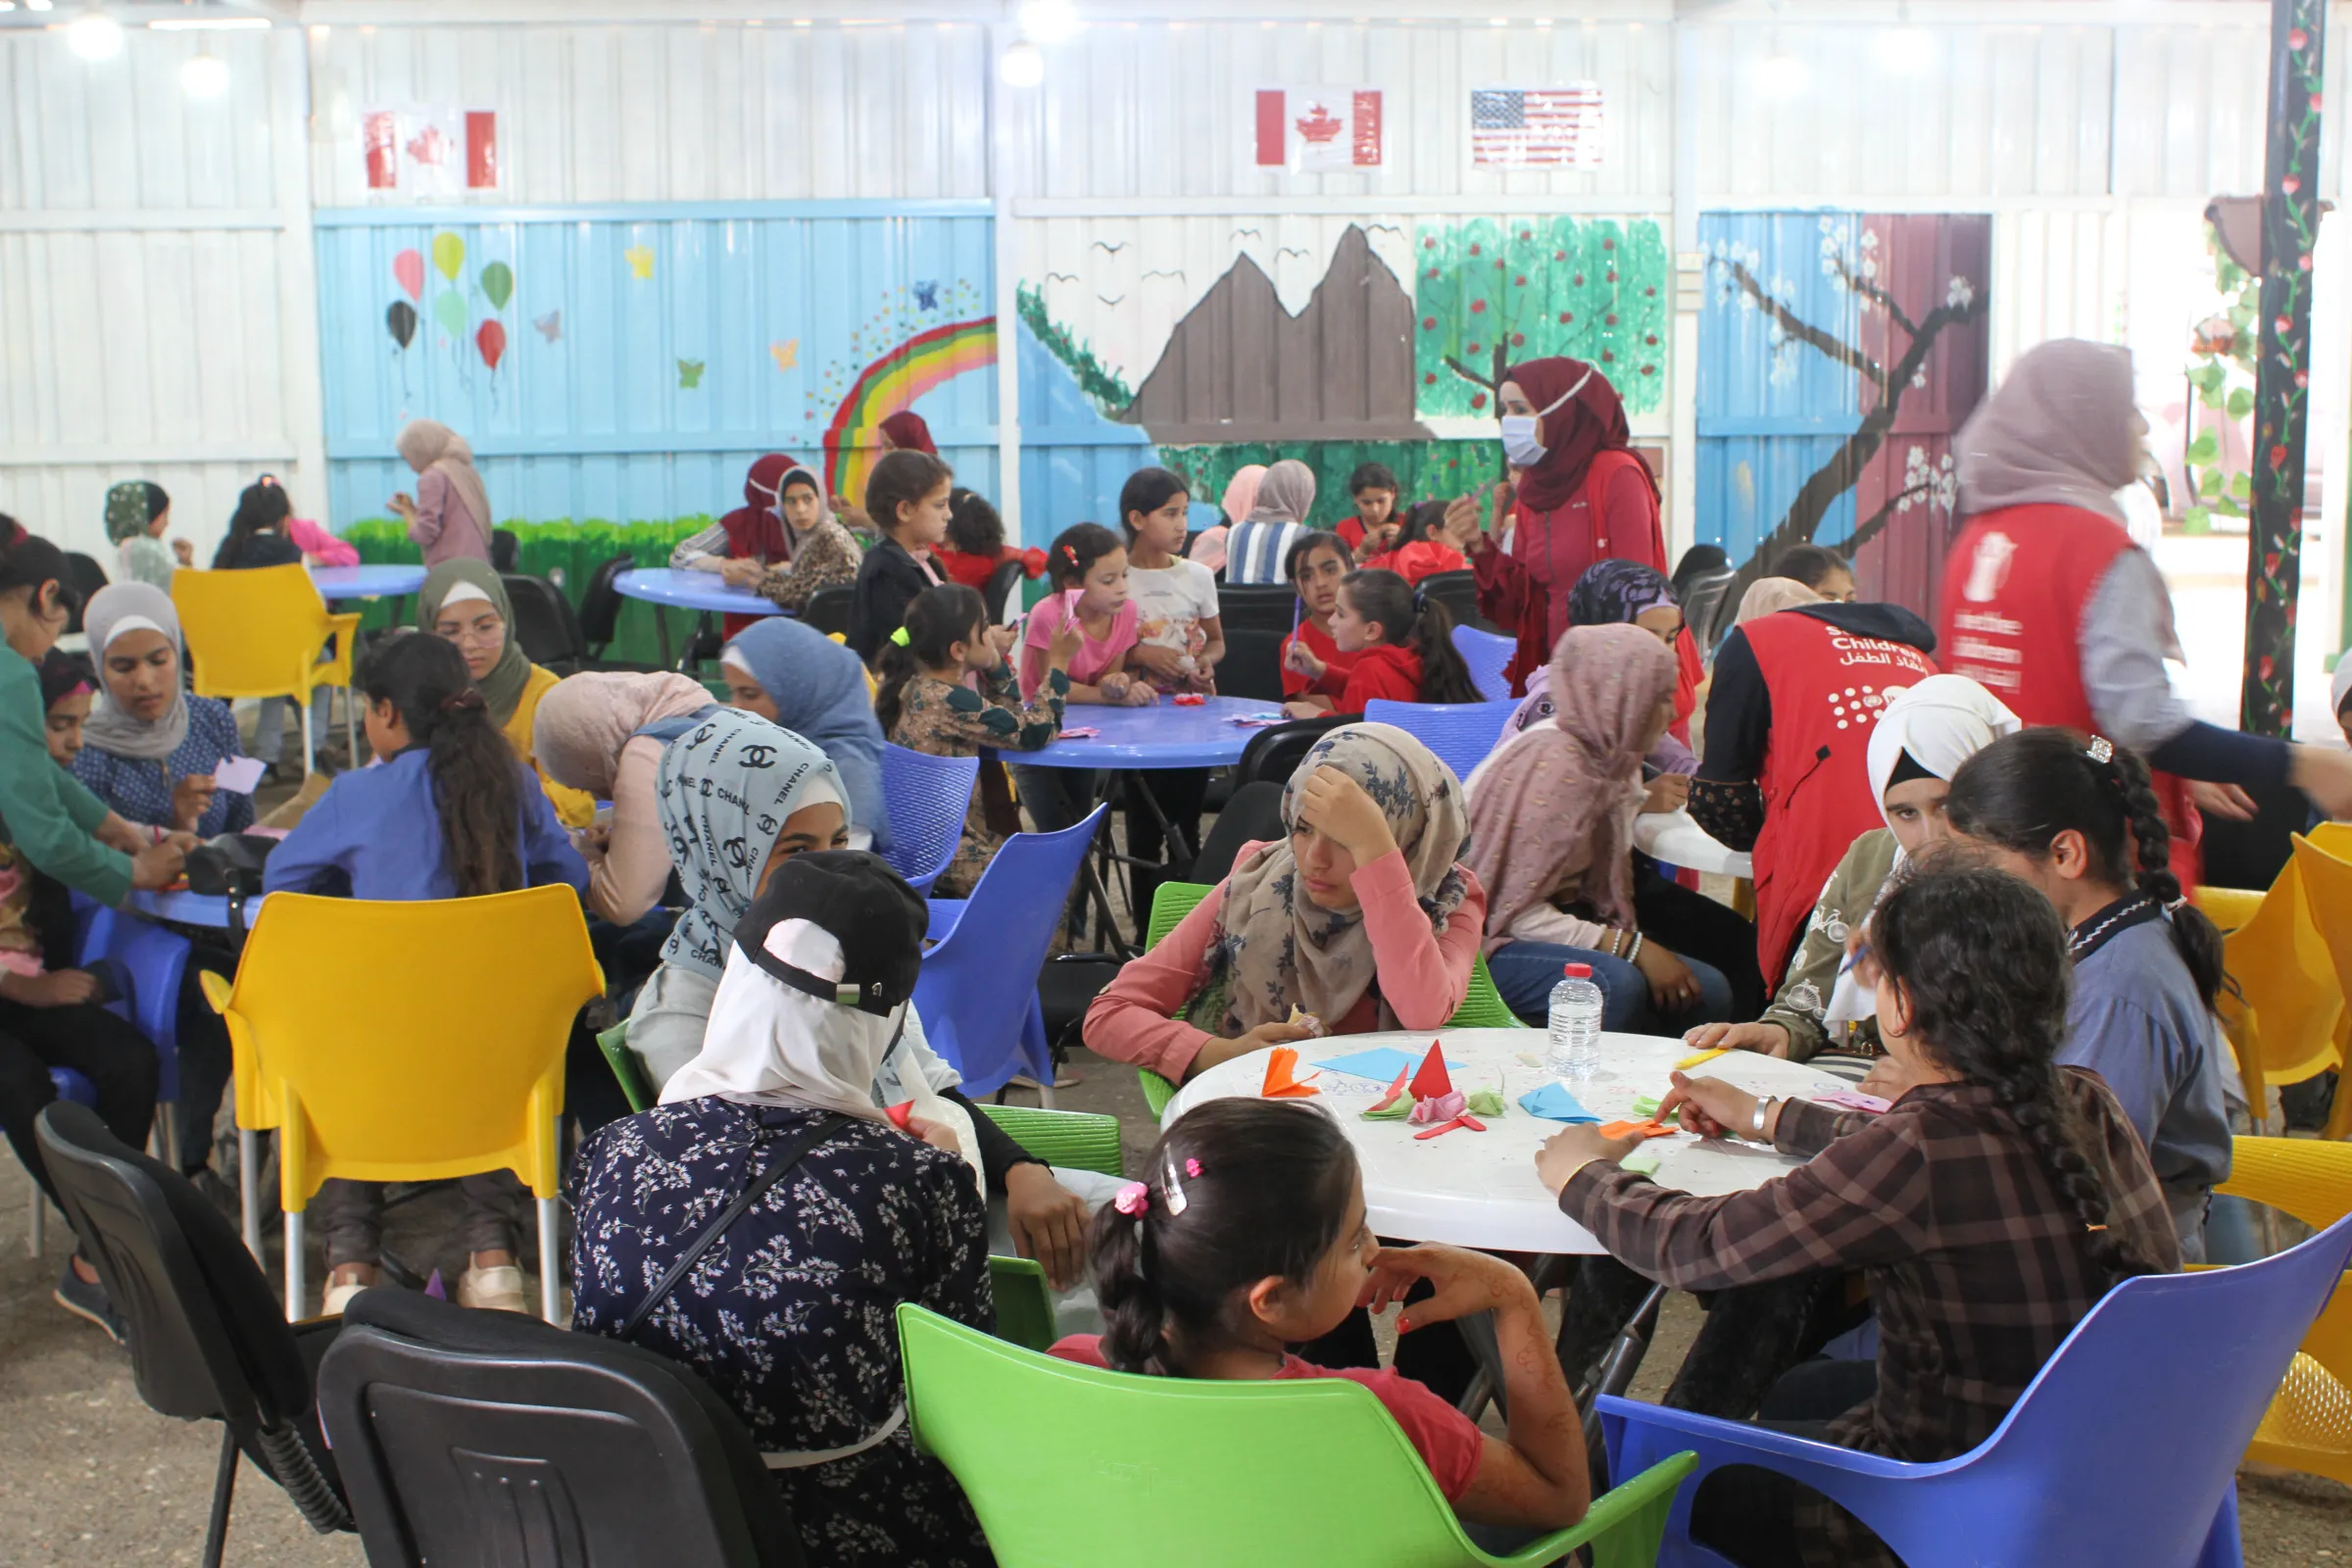 Syrian girls attend classes inside a youth centre at the Zaatari refugee camp near the border city of Mafraq, Jordan, 18 October 2022